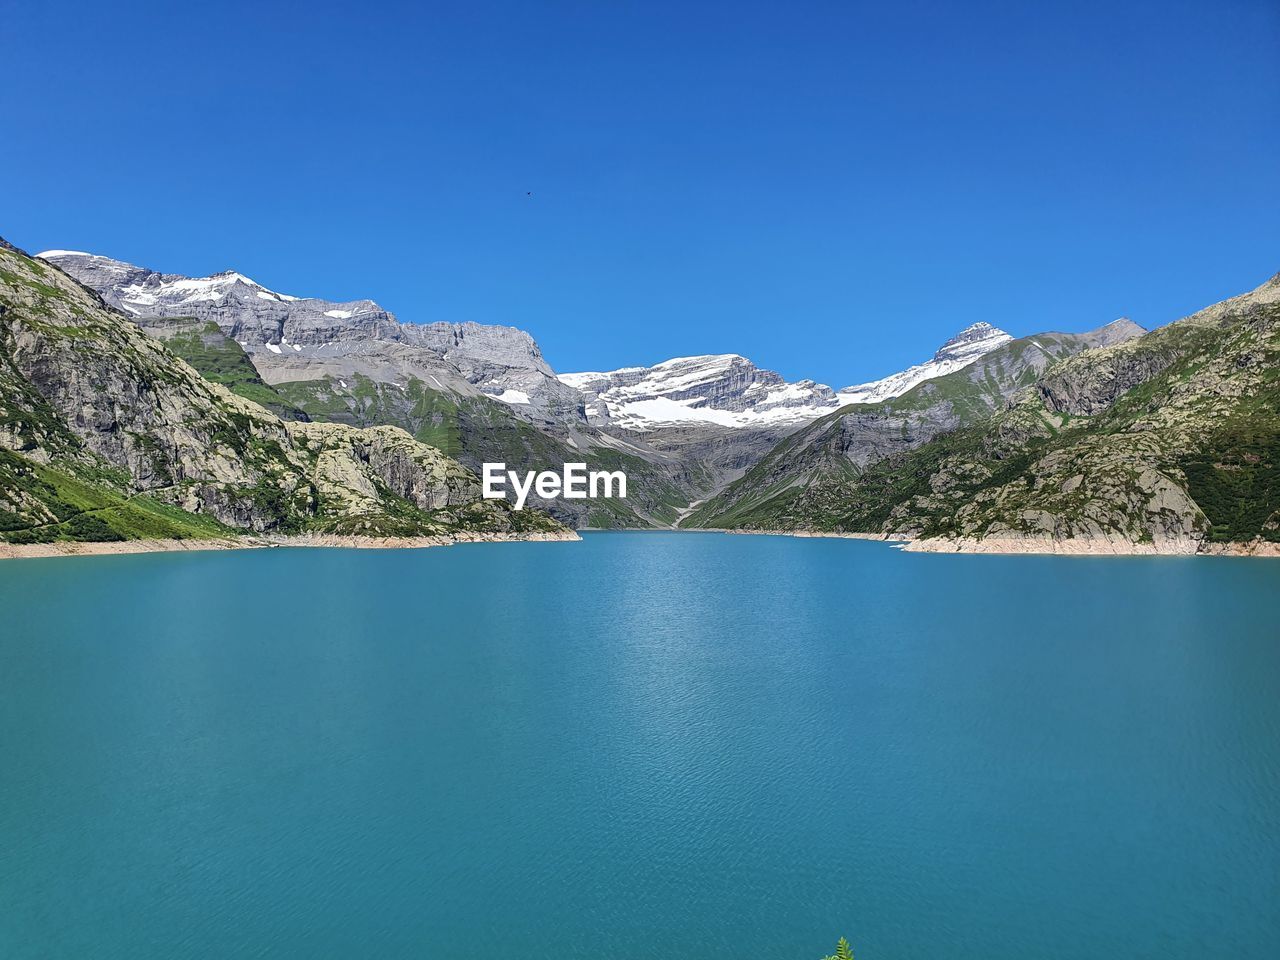 SCENIC VIEW OF LAKE AND MOUNTAINS AGAINST BLUE SKY